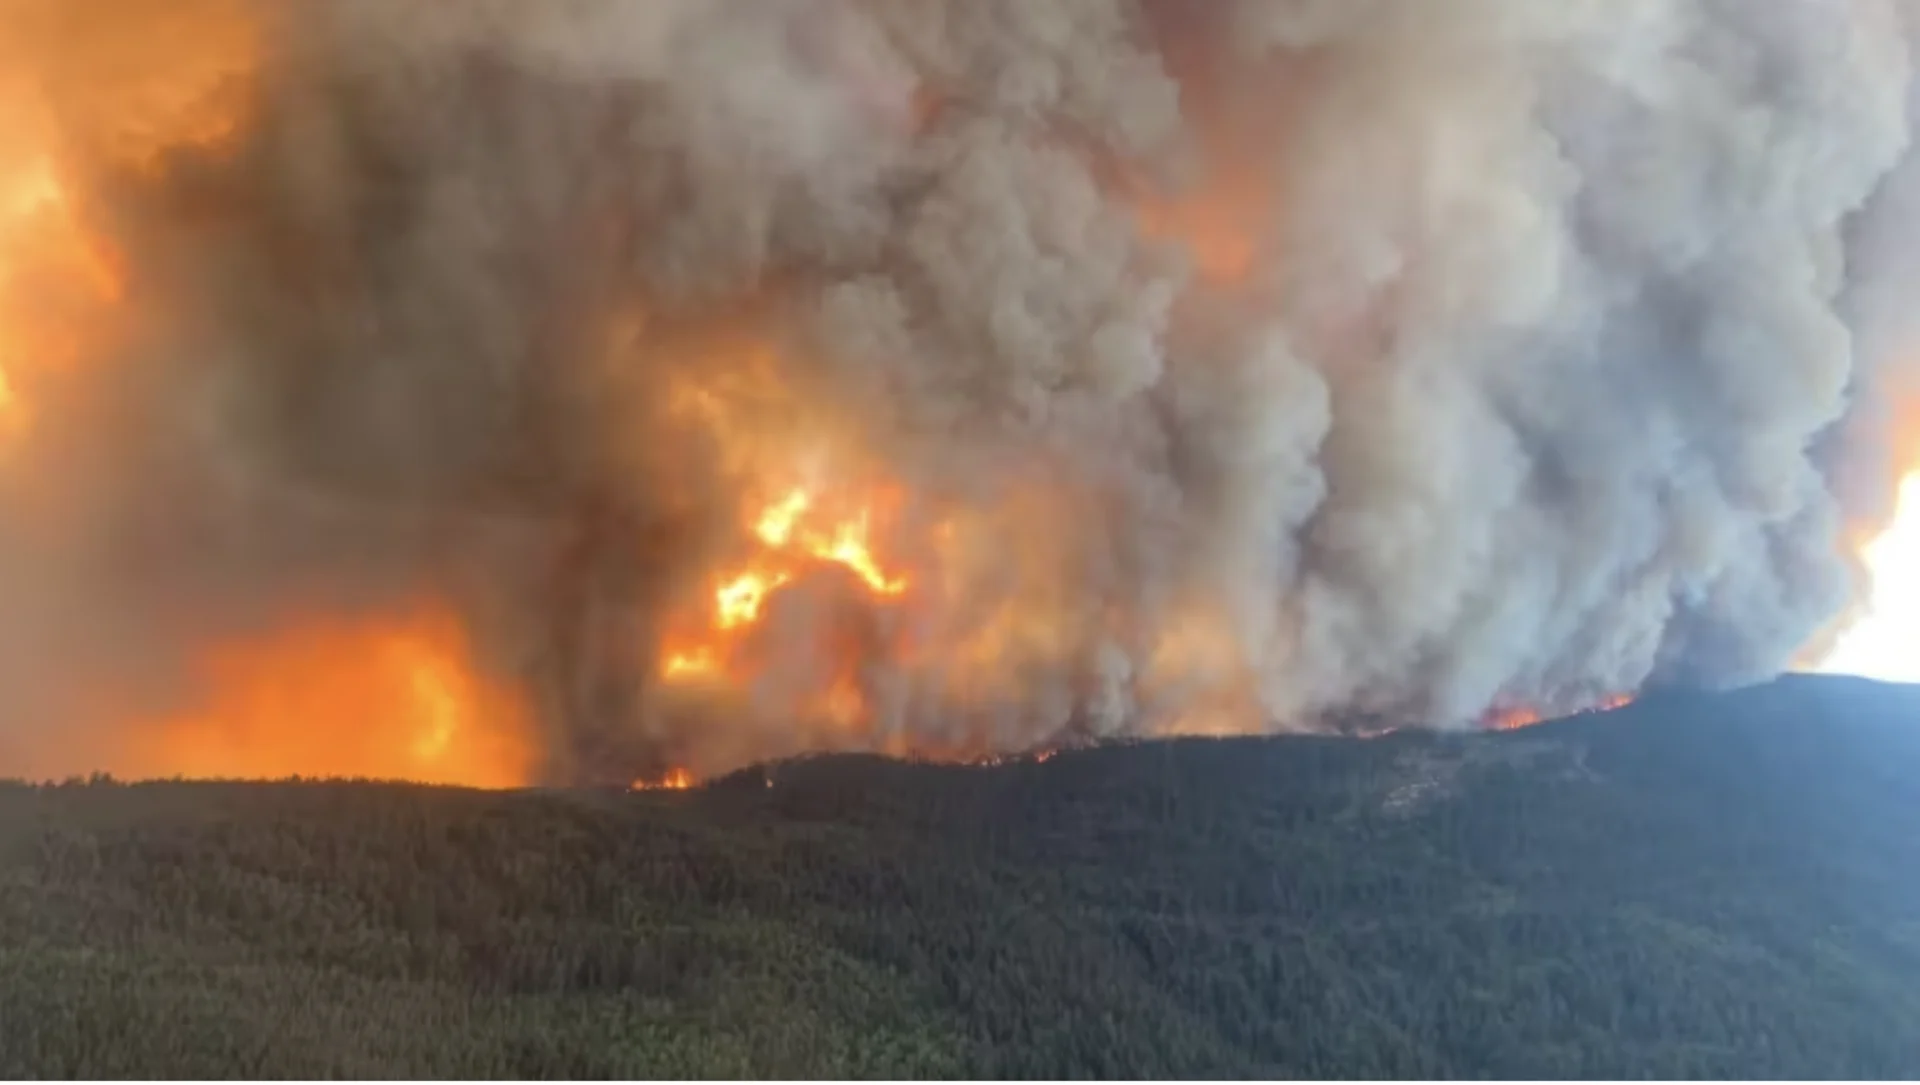 Dozens of structures destroyed by wildfire burning along Hwy 1 near Lytton, B.C.